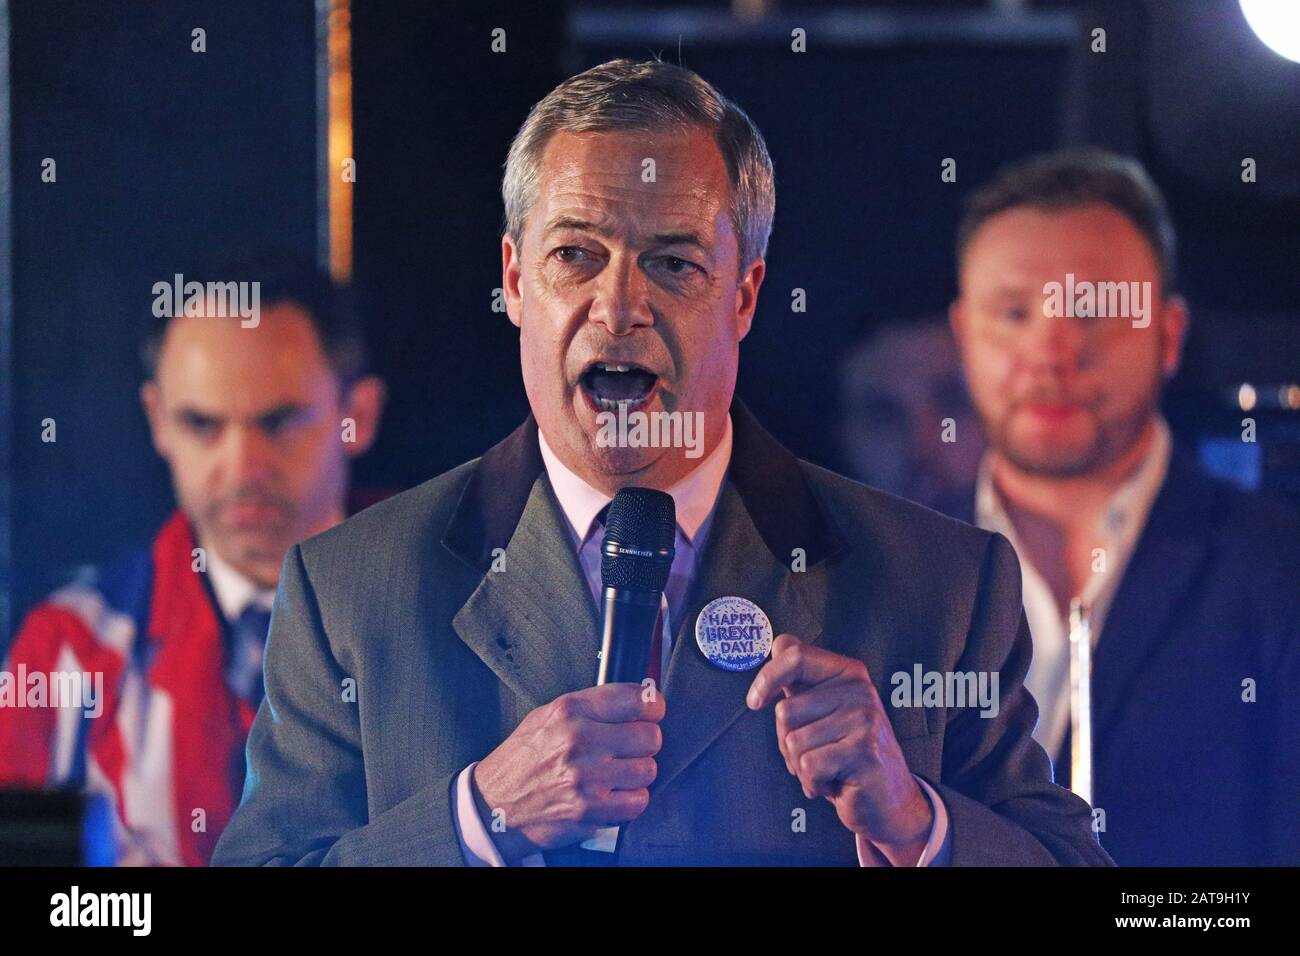 Nigel Farage speaks to pro-Brexit supporters in Parliament Square, London, after the UK left the European Union, ending 47 years of close and sometimes uncomfortable ties to Brussels. Stock Photo